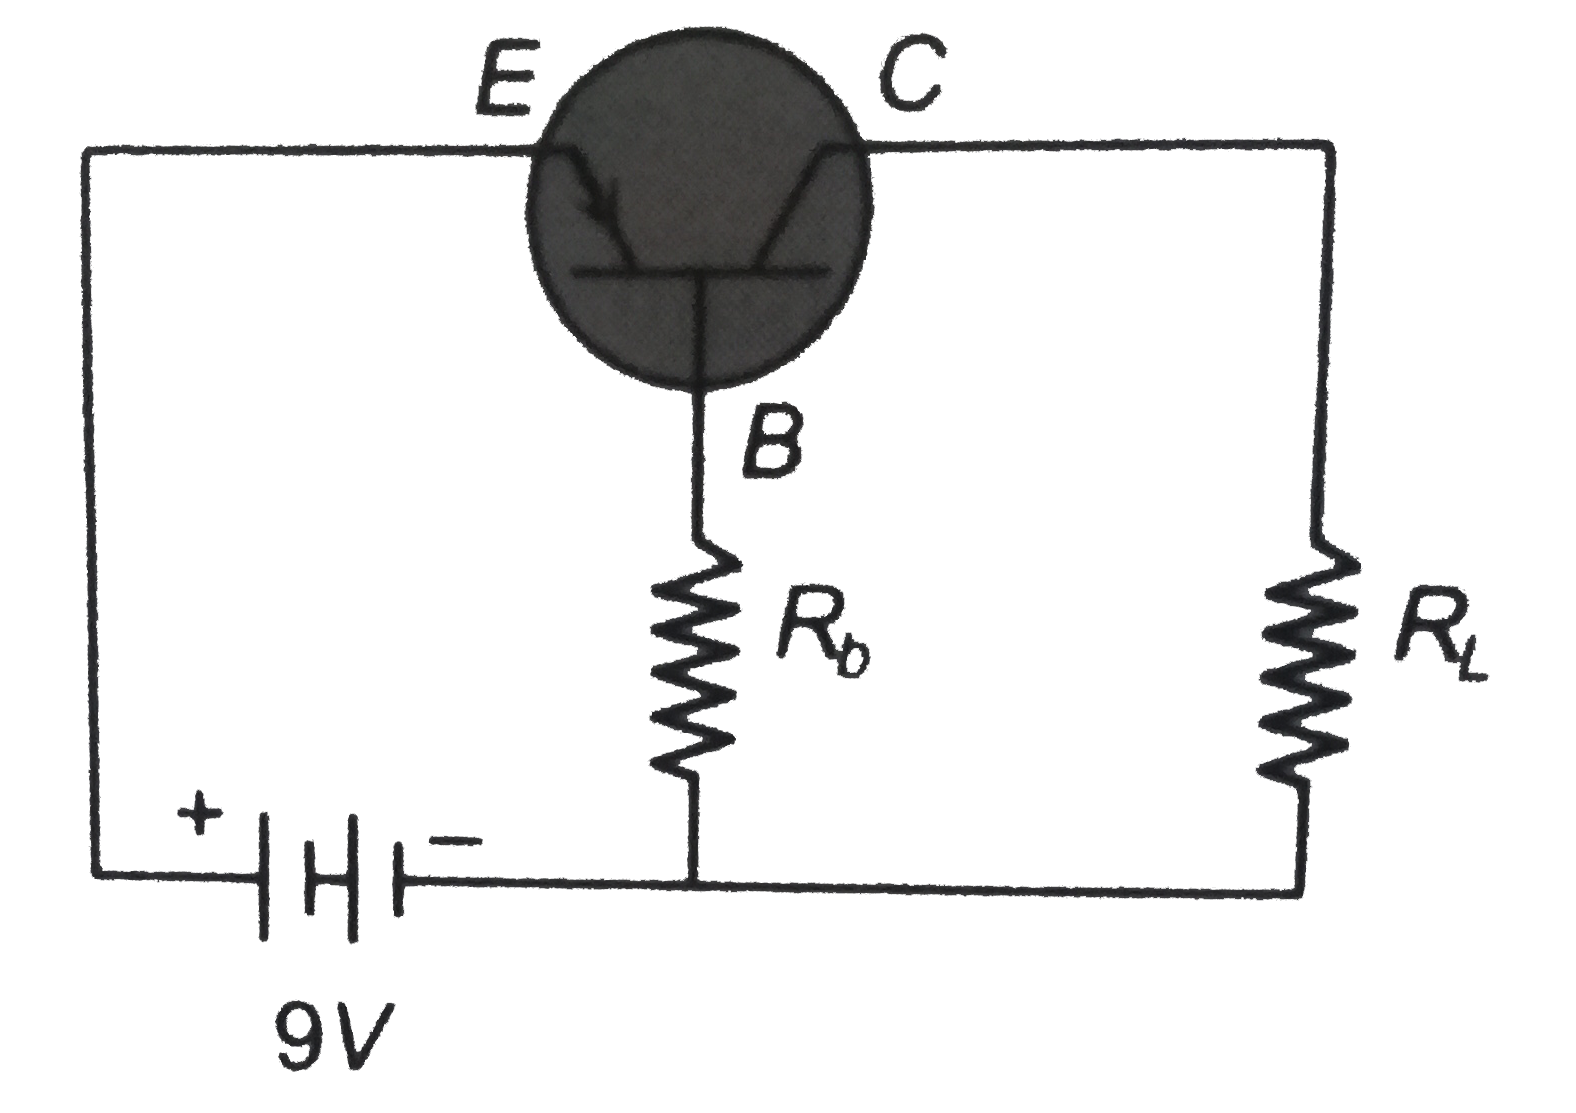 In a transistor circuit shown here the base current is 35 muA. The value of the resistor R(b) is